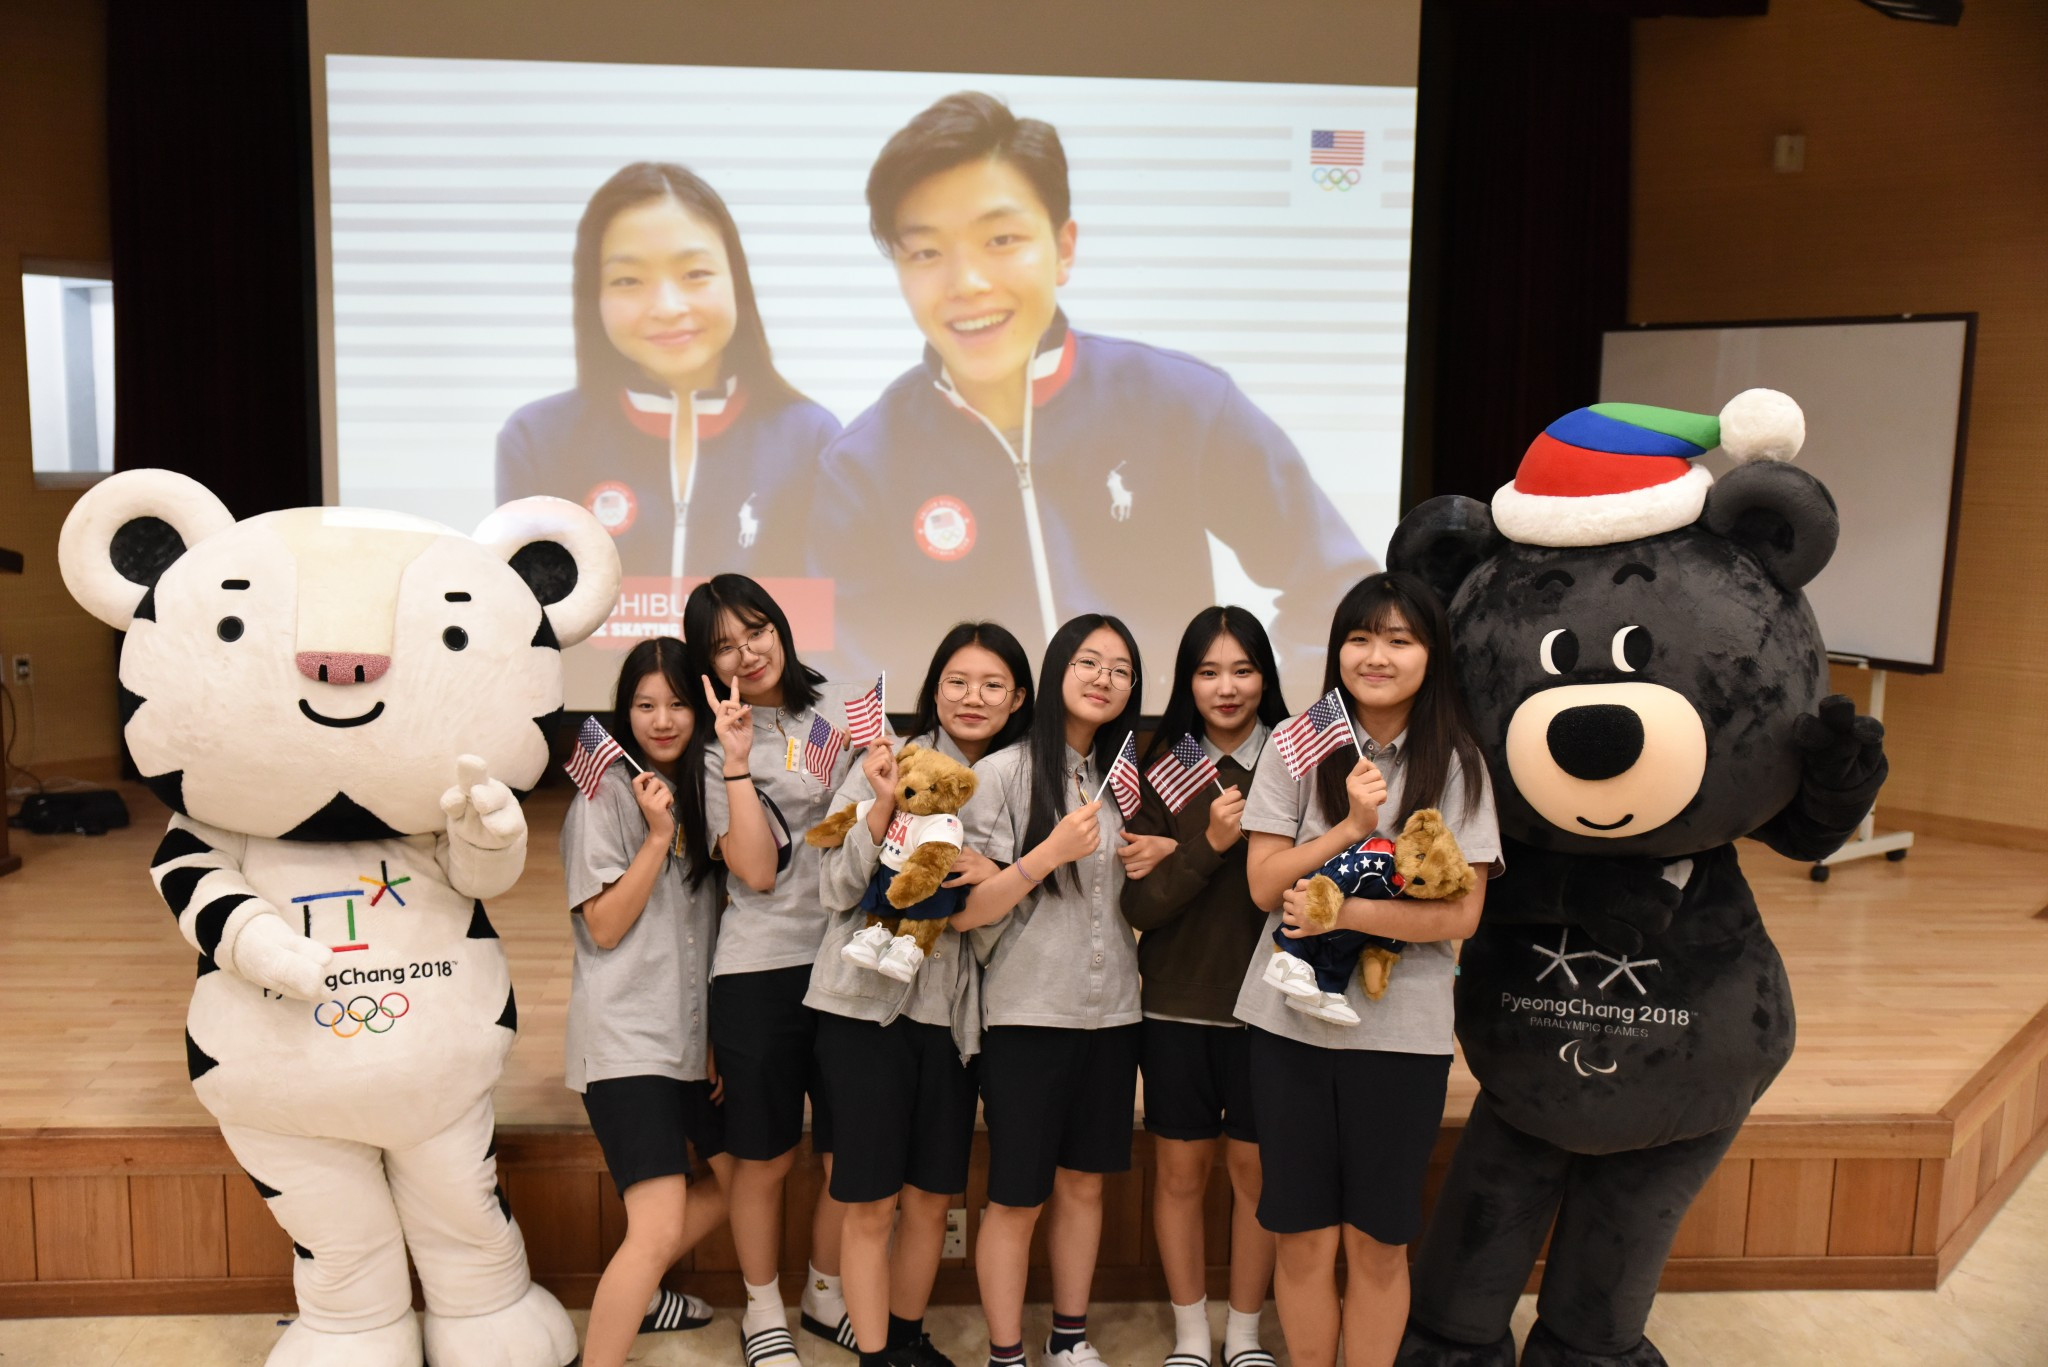 The United States Olympic Committee has today launched a Korean youth mentorship programme in partnership with the Pyeongchang 2018 Organising Committee and Jinbu Middle School ©Pyeongchang 2018